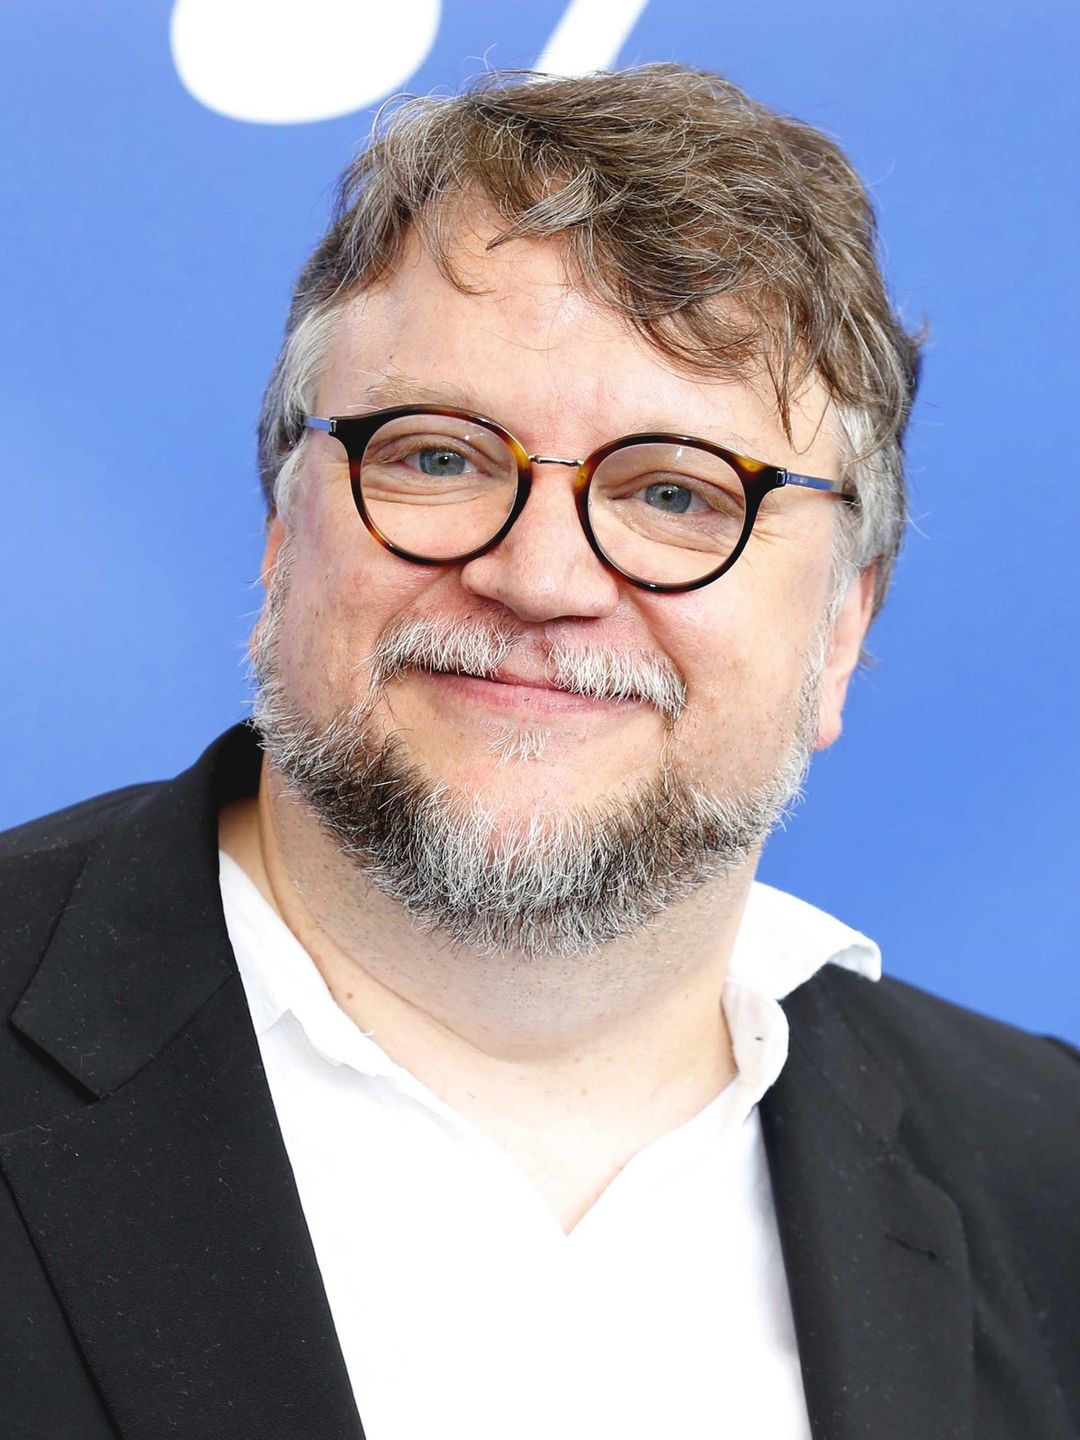 Guillermo del Toro childhood story